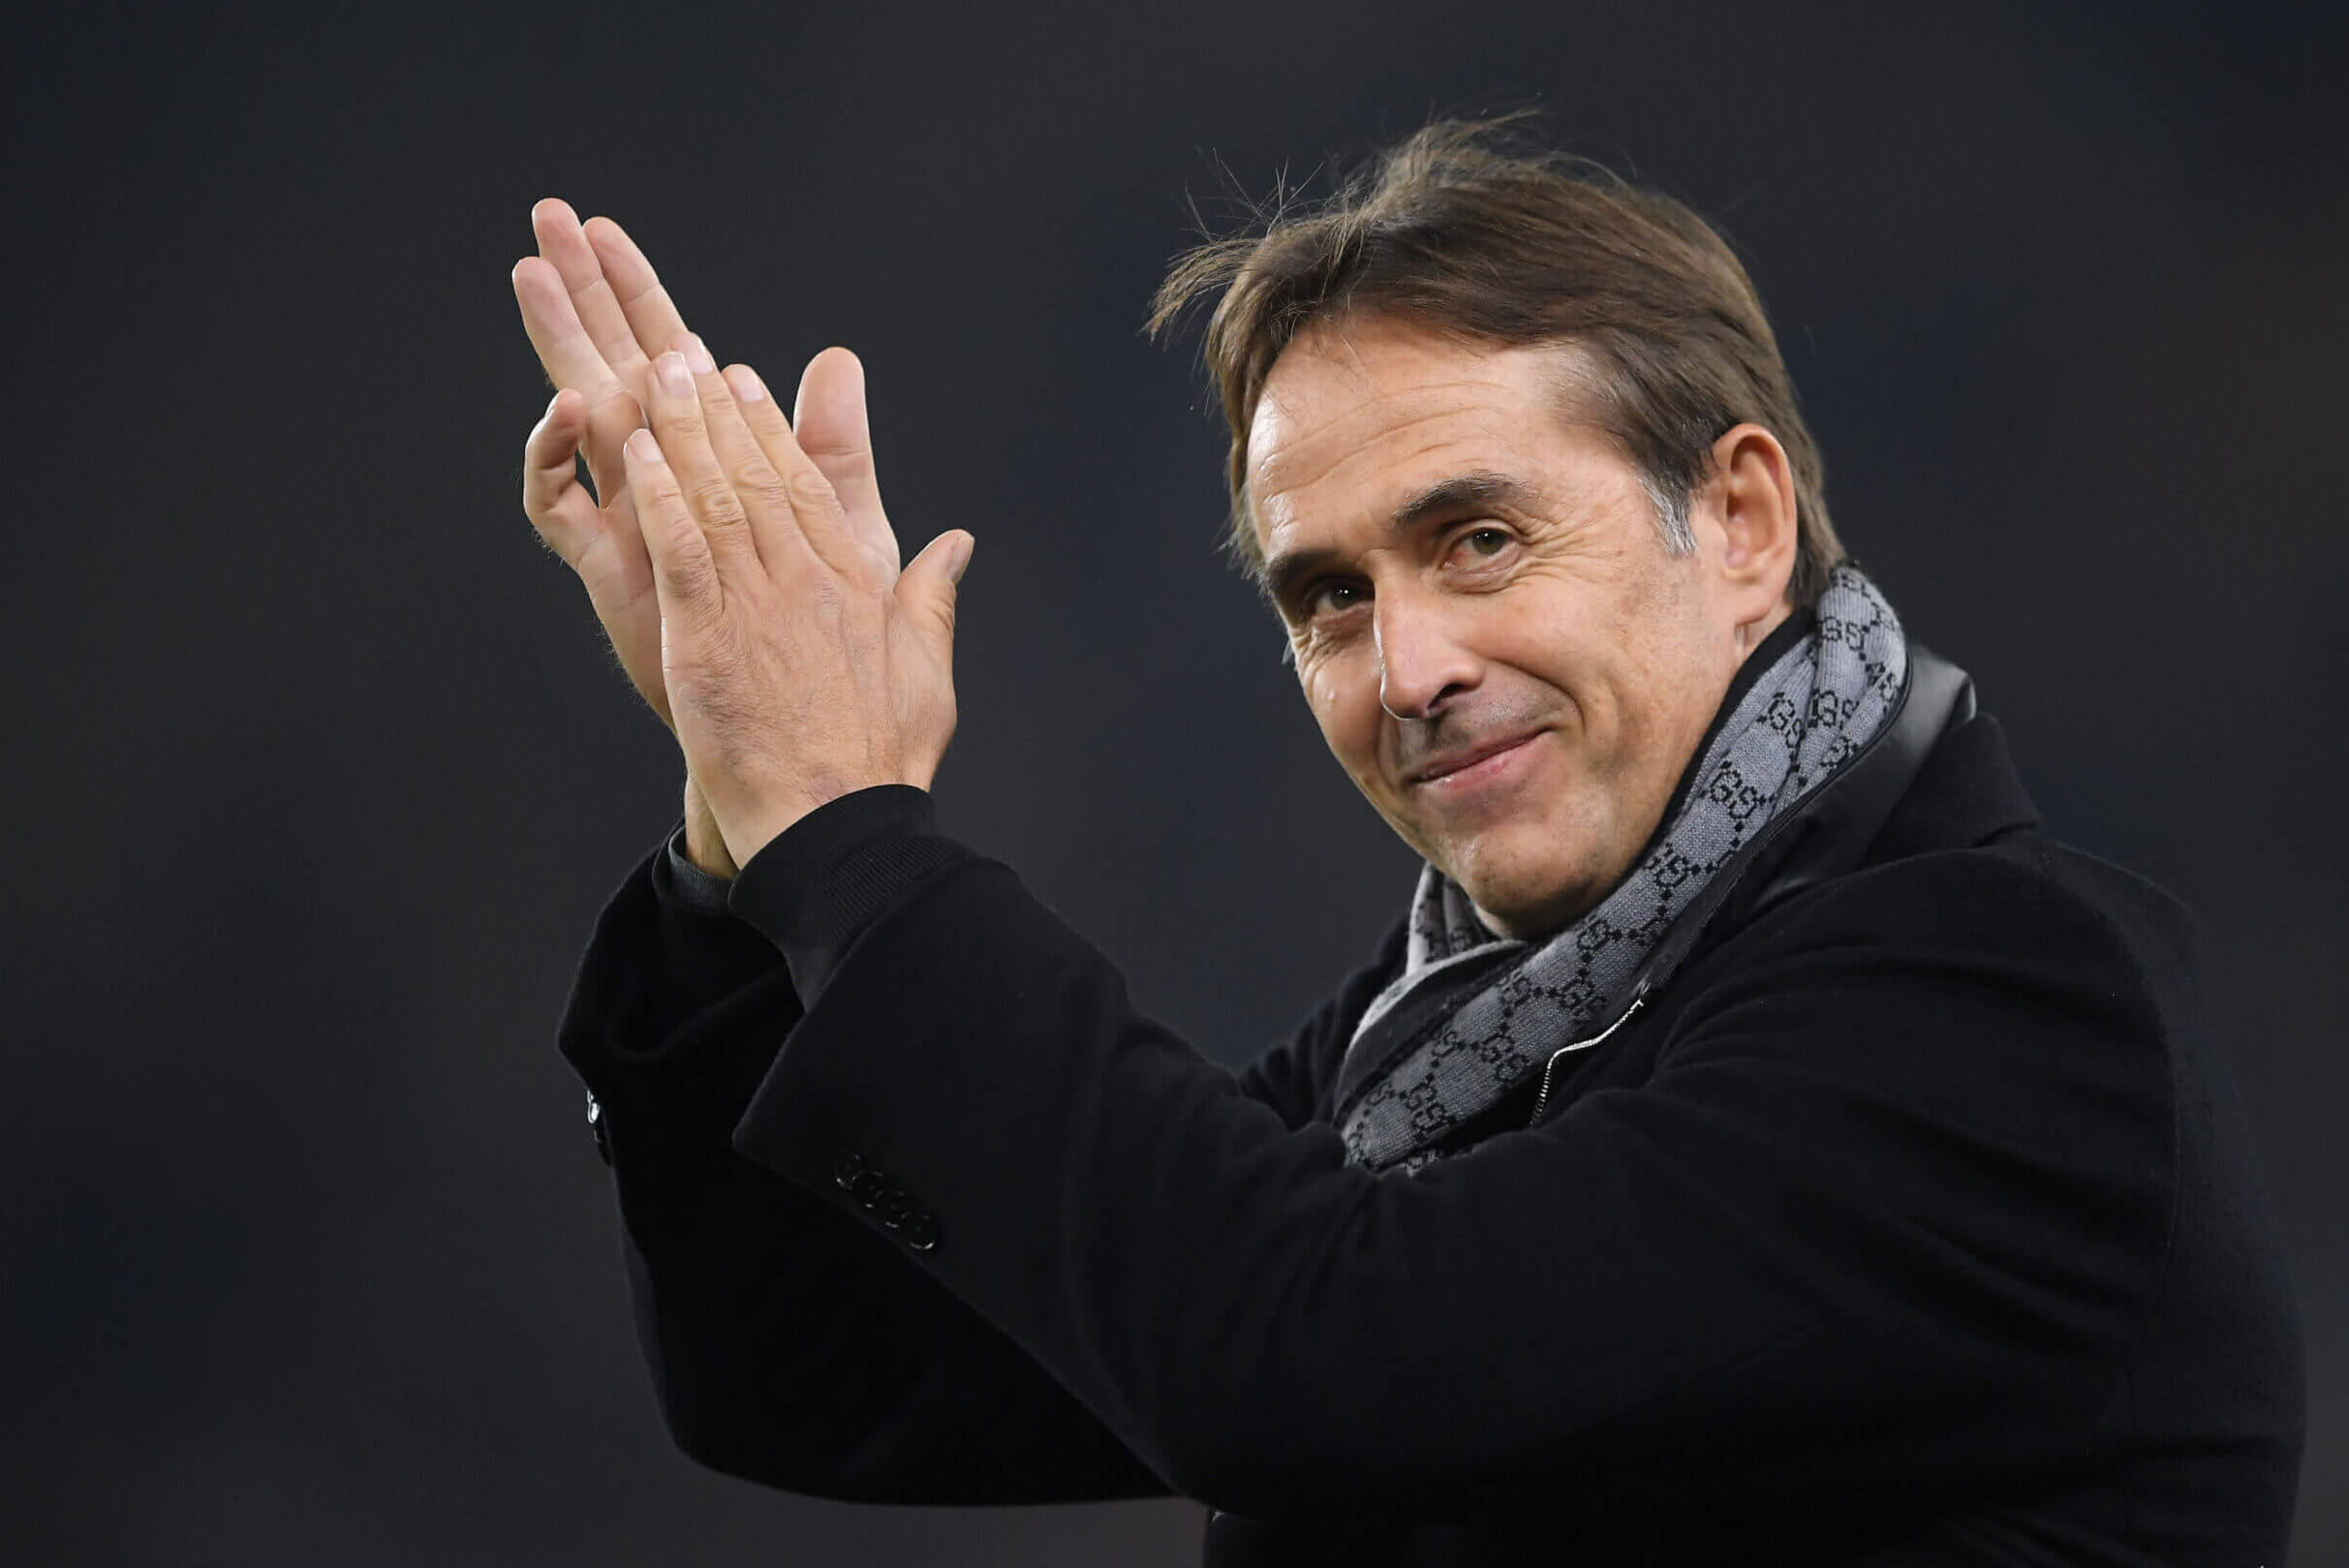 What can West Ham expect from Julen Lopetegui